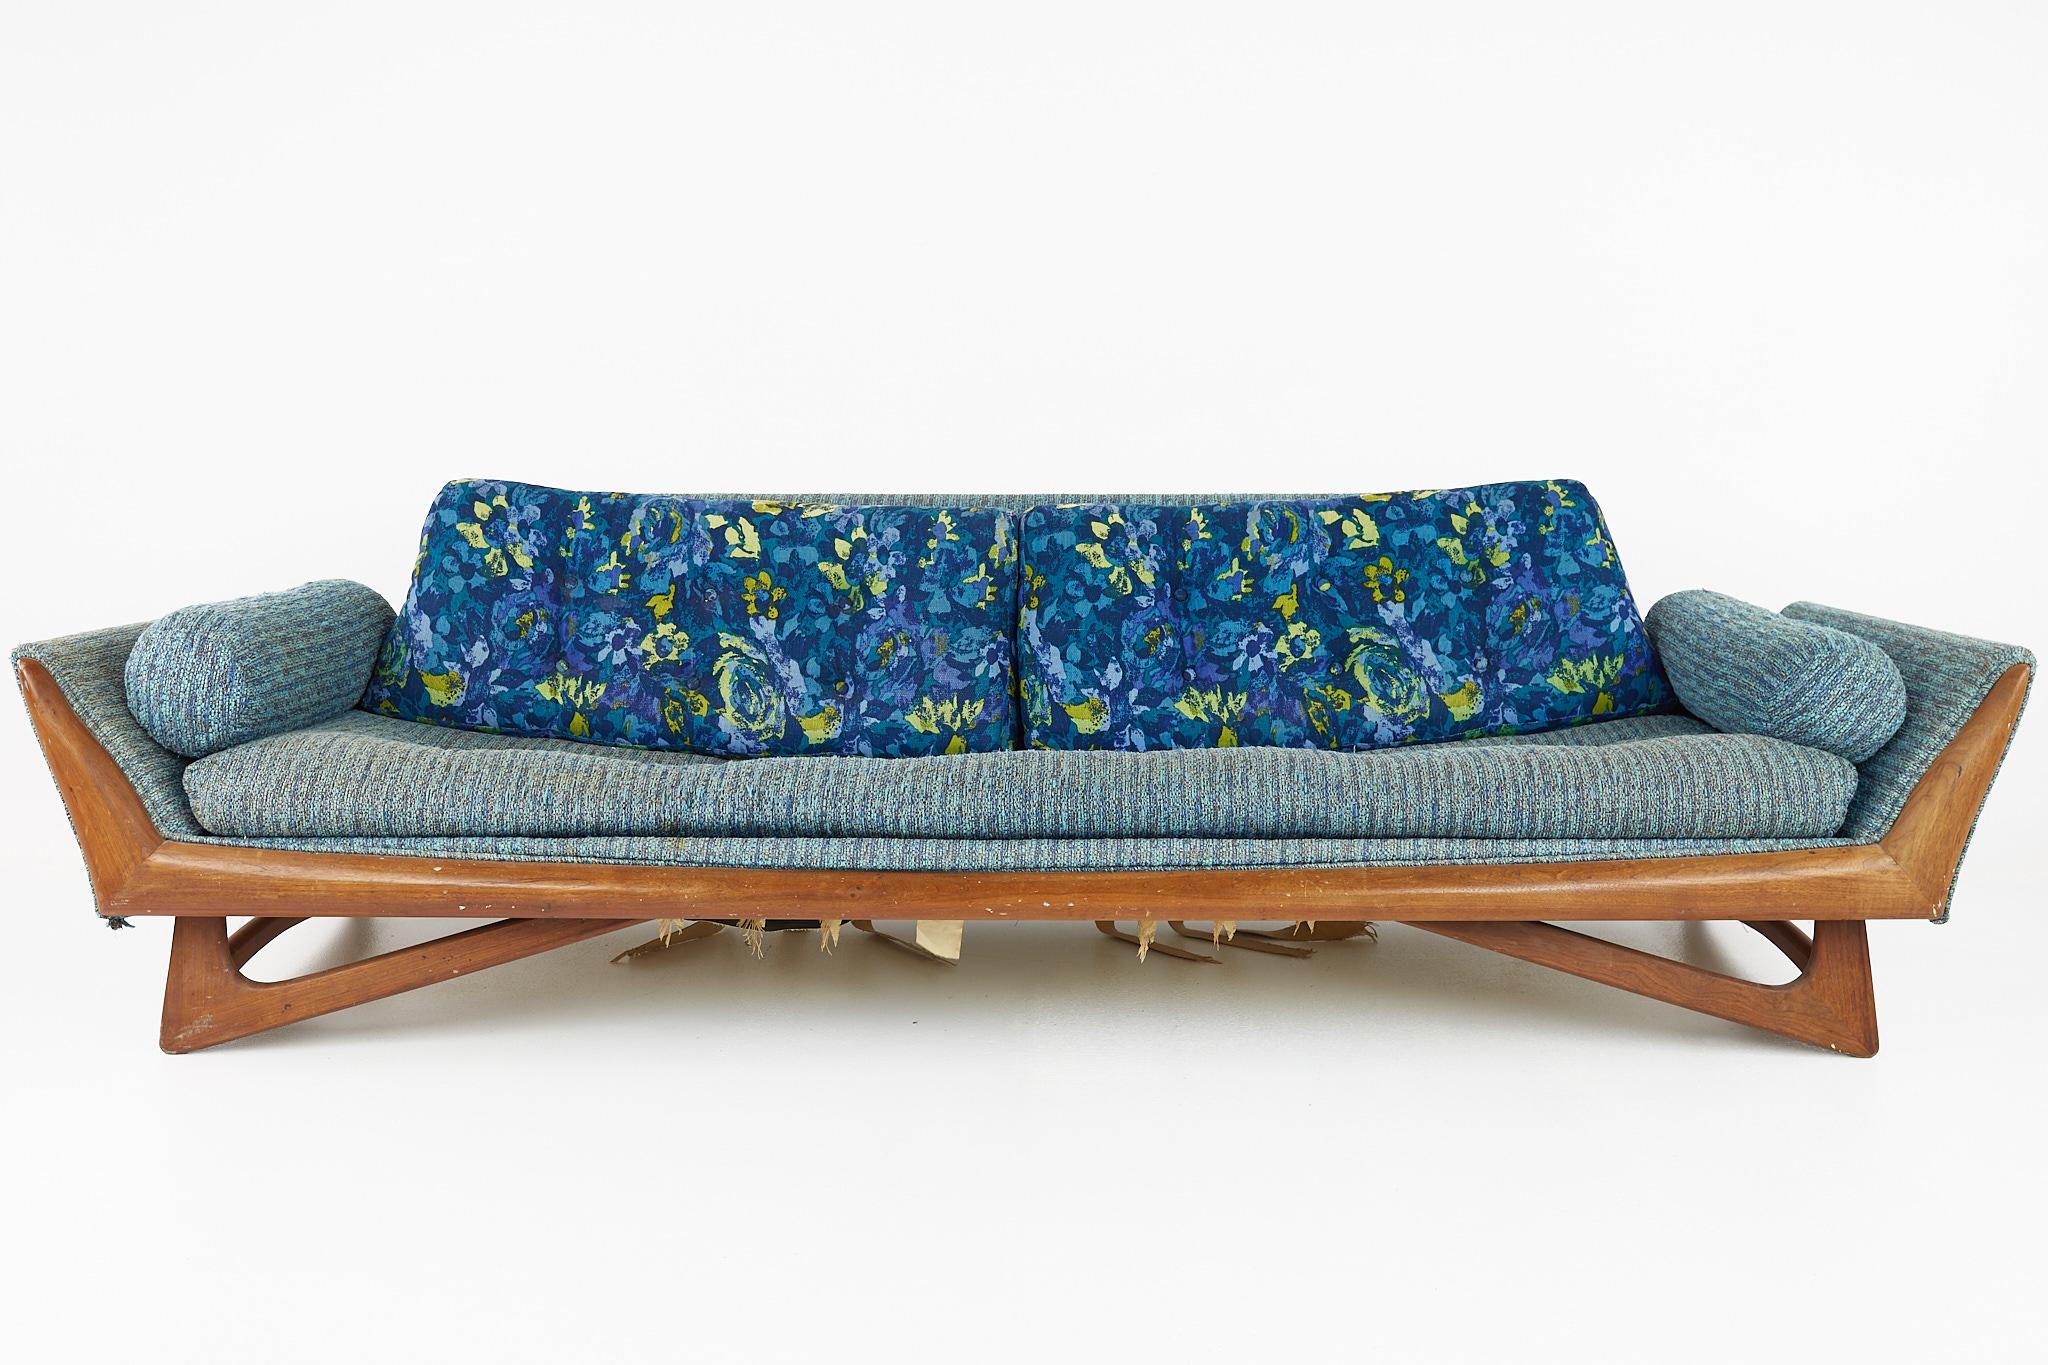 Adrian Pearsall for Craft Associates mid century walnut gondola sofa

This sofa measures: 103 wide x 33 deep x 27 inches high, with a seat height of 17 and arm height of 22 inches

All pieces of furniture can be had in what we call restored